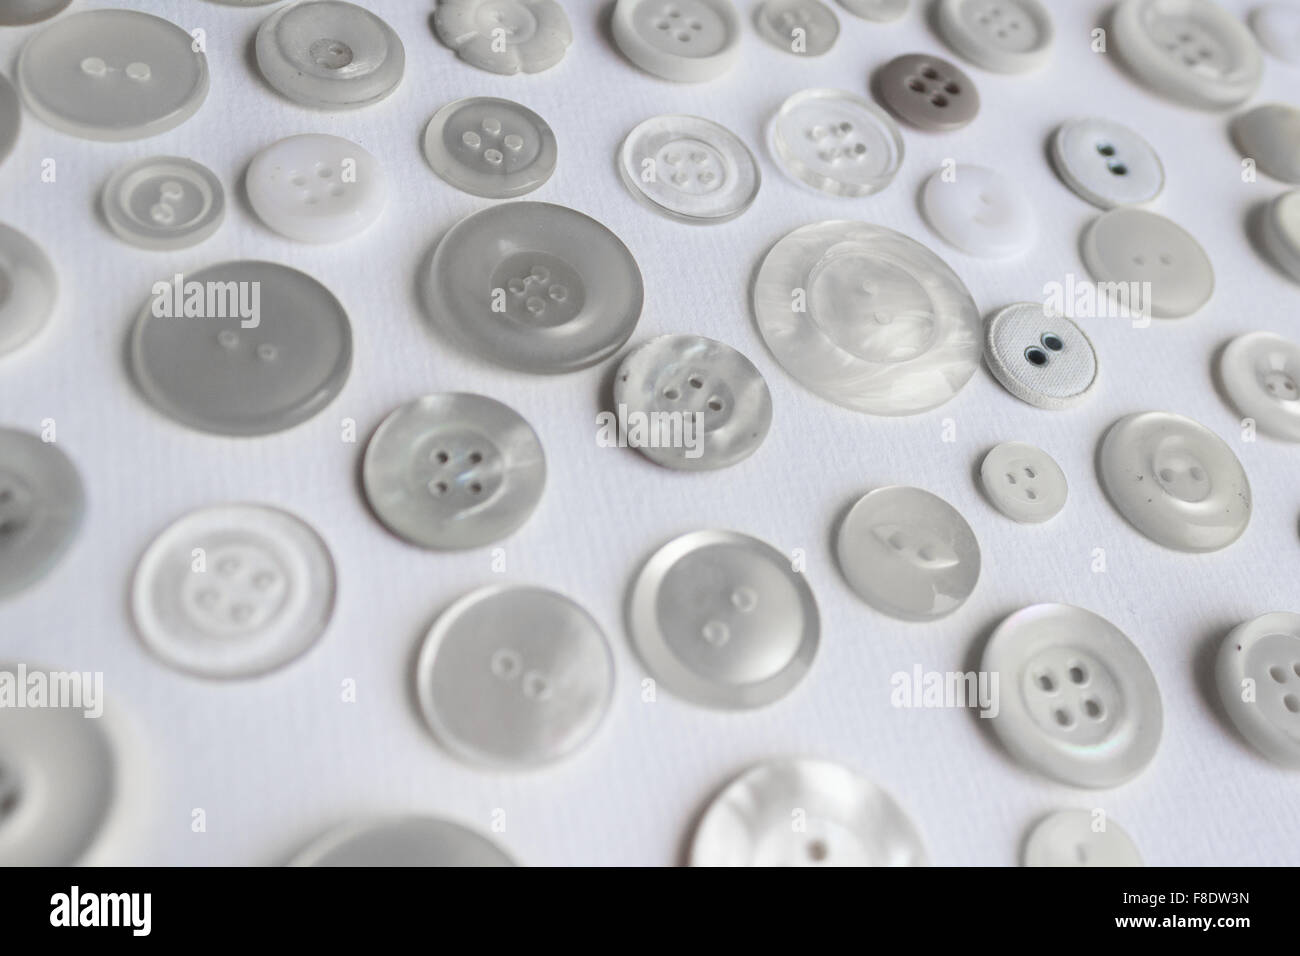 many clothing buttons on white background Stock Photo